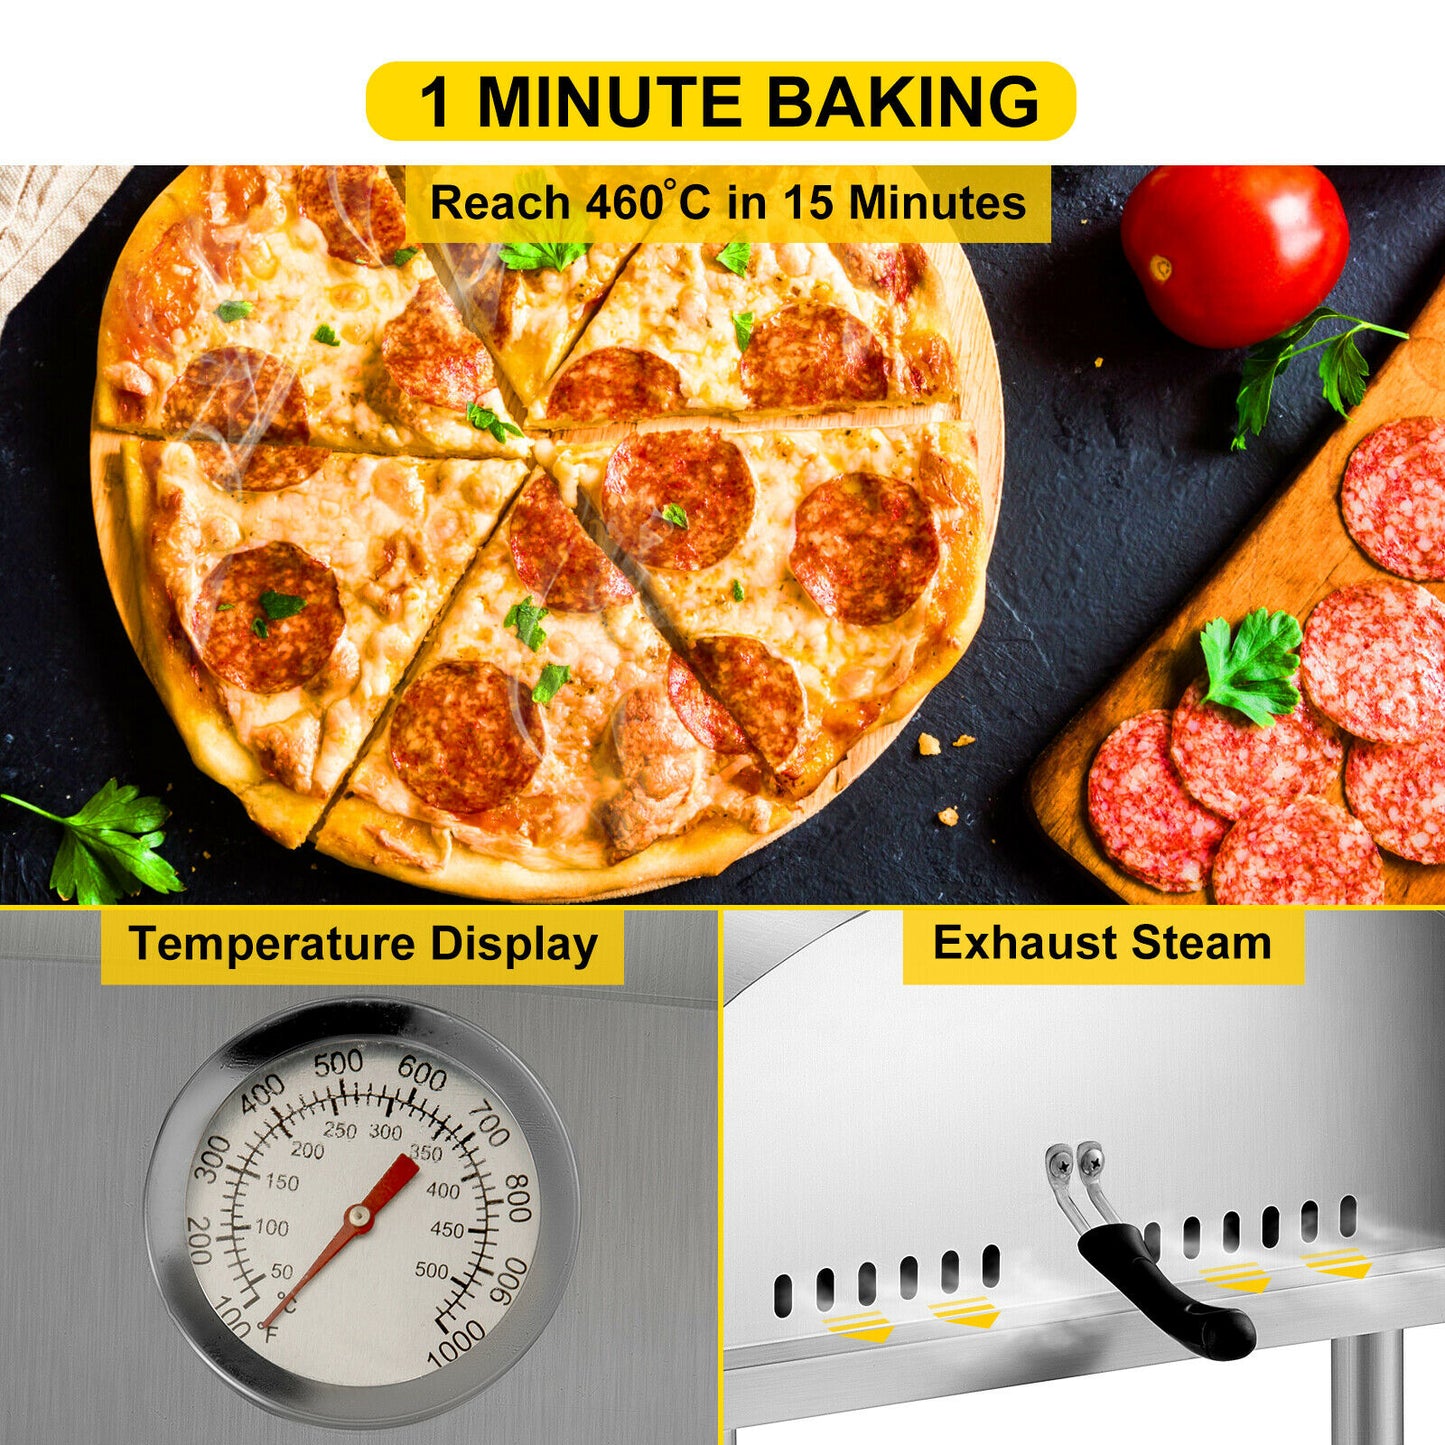 12" Portable Pizza Oven Wood Fired Stainless Steel for Outdoor BBQ Picnics Baking Pizza, Bread, Shrimp, Sausage